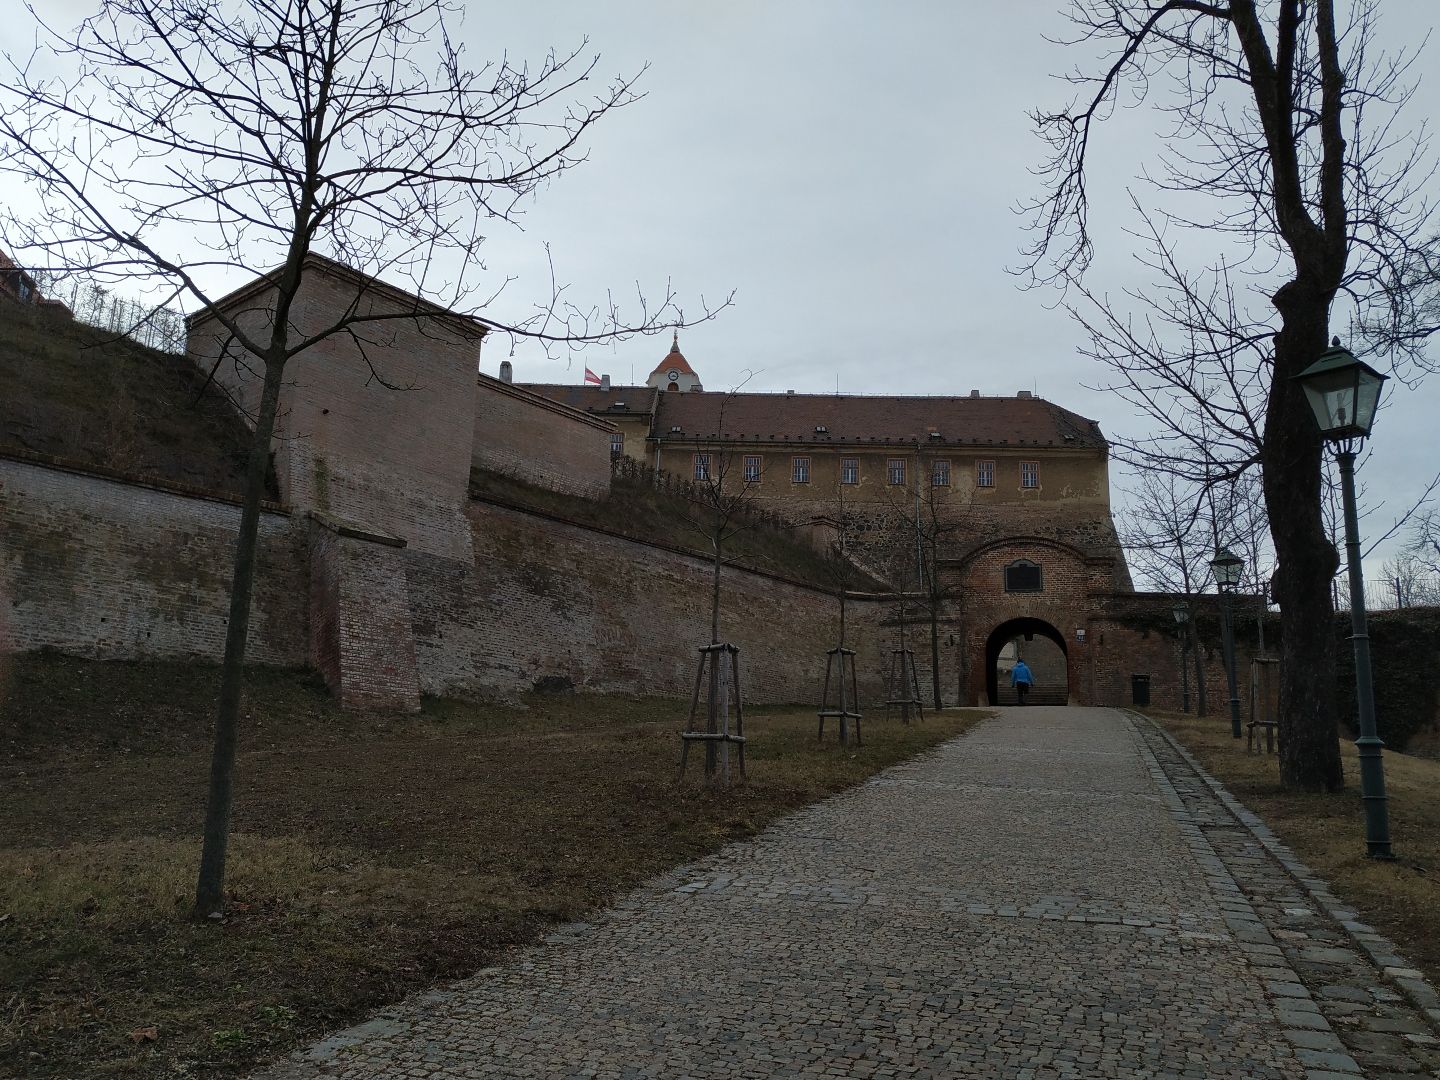 The entrance to the castle